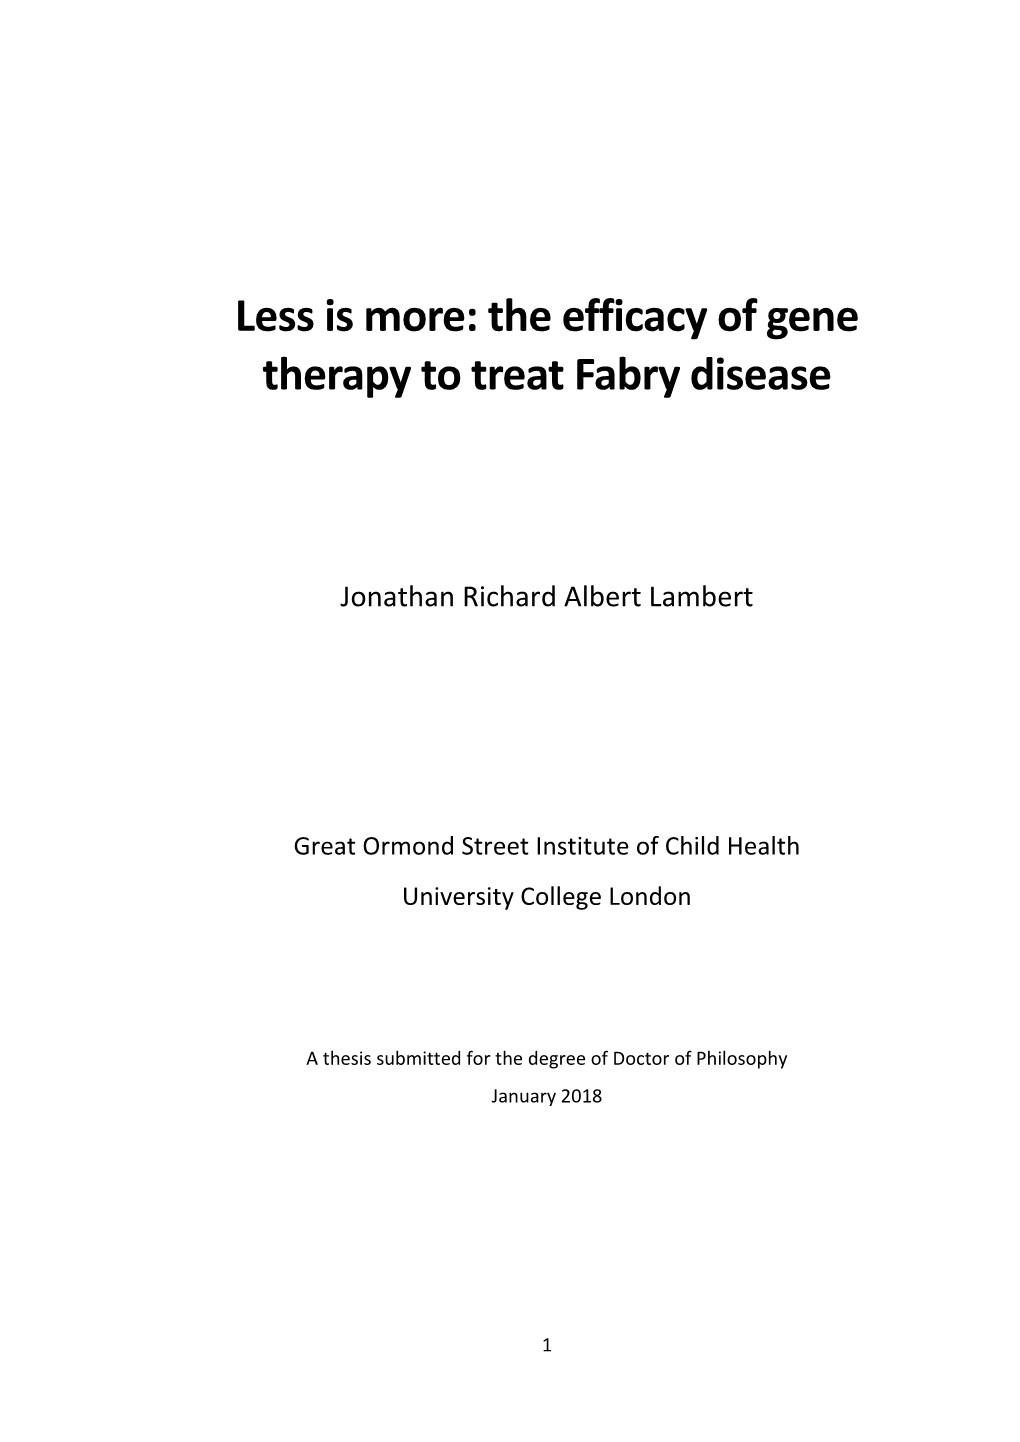 The Efficacy of Gene Therapy to Treat Fabry Disease